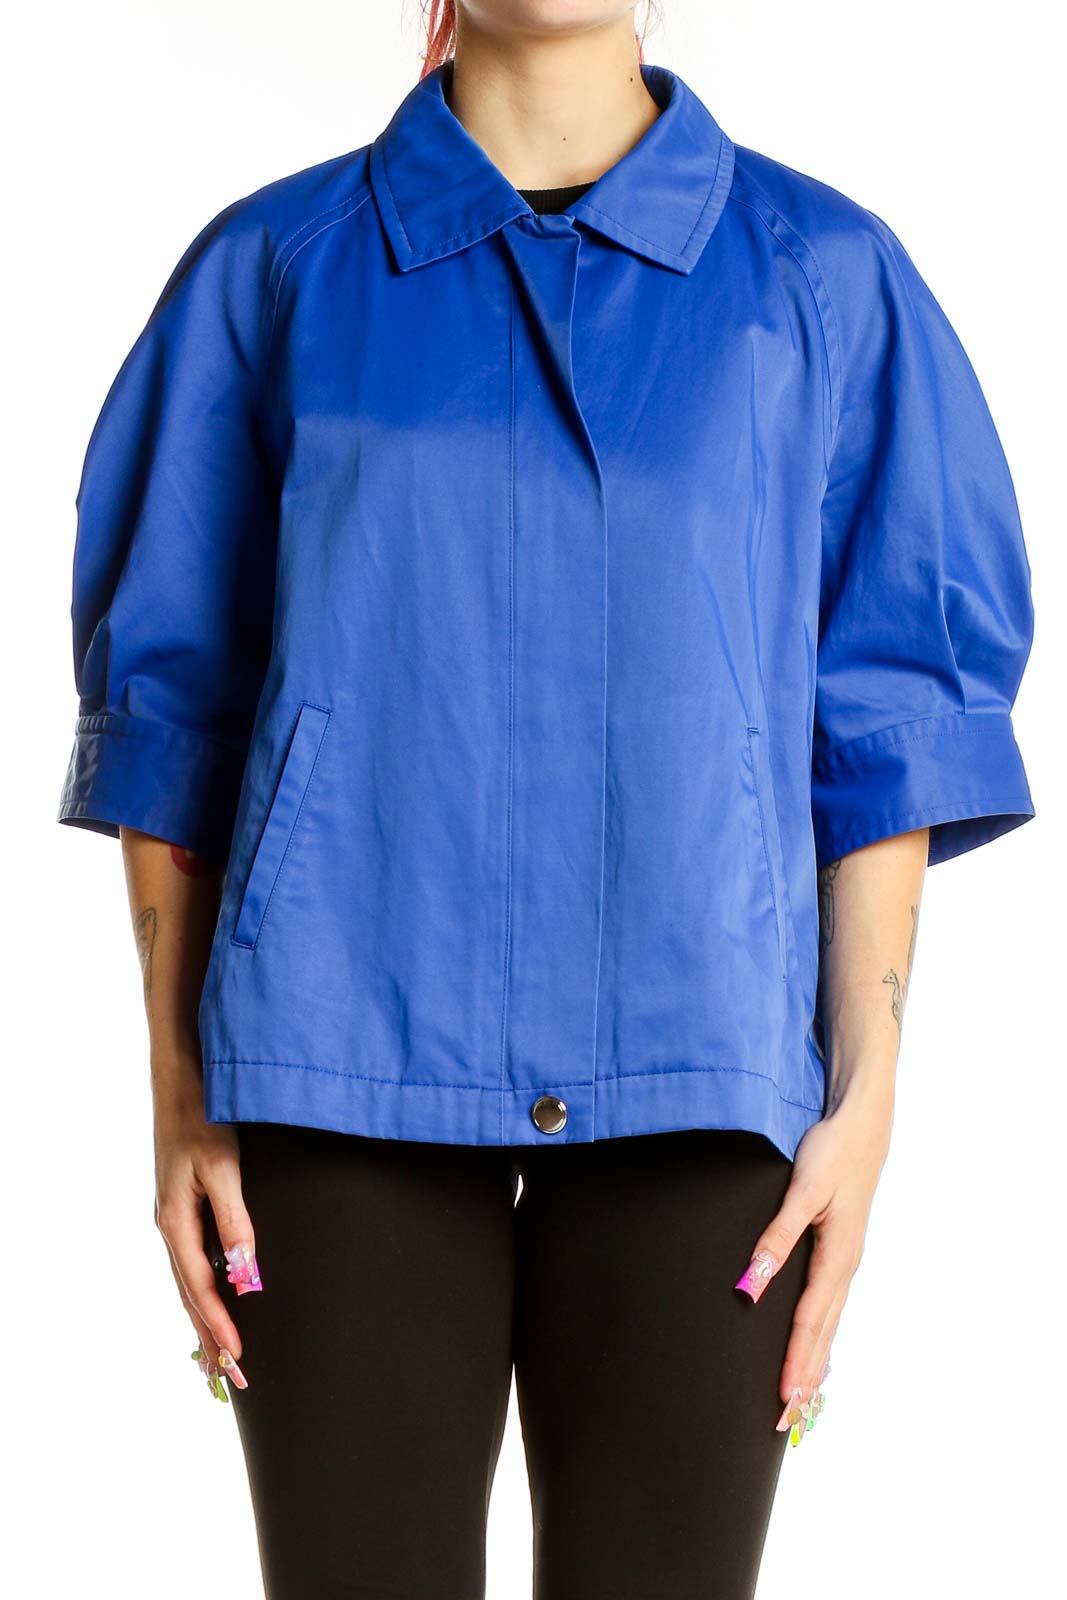 Blue Tie Neck Solid Shirt Top Front